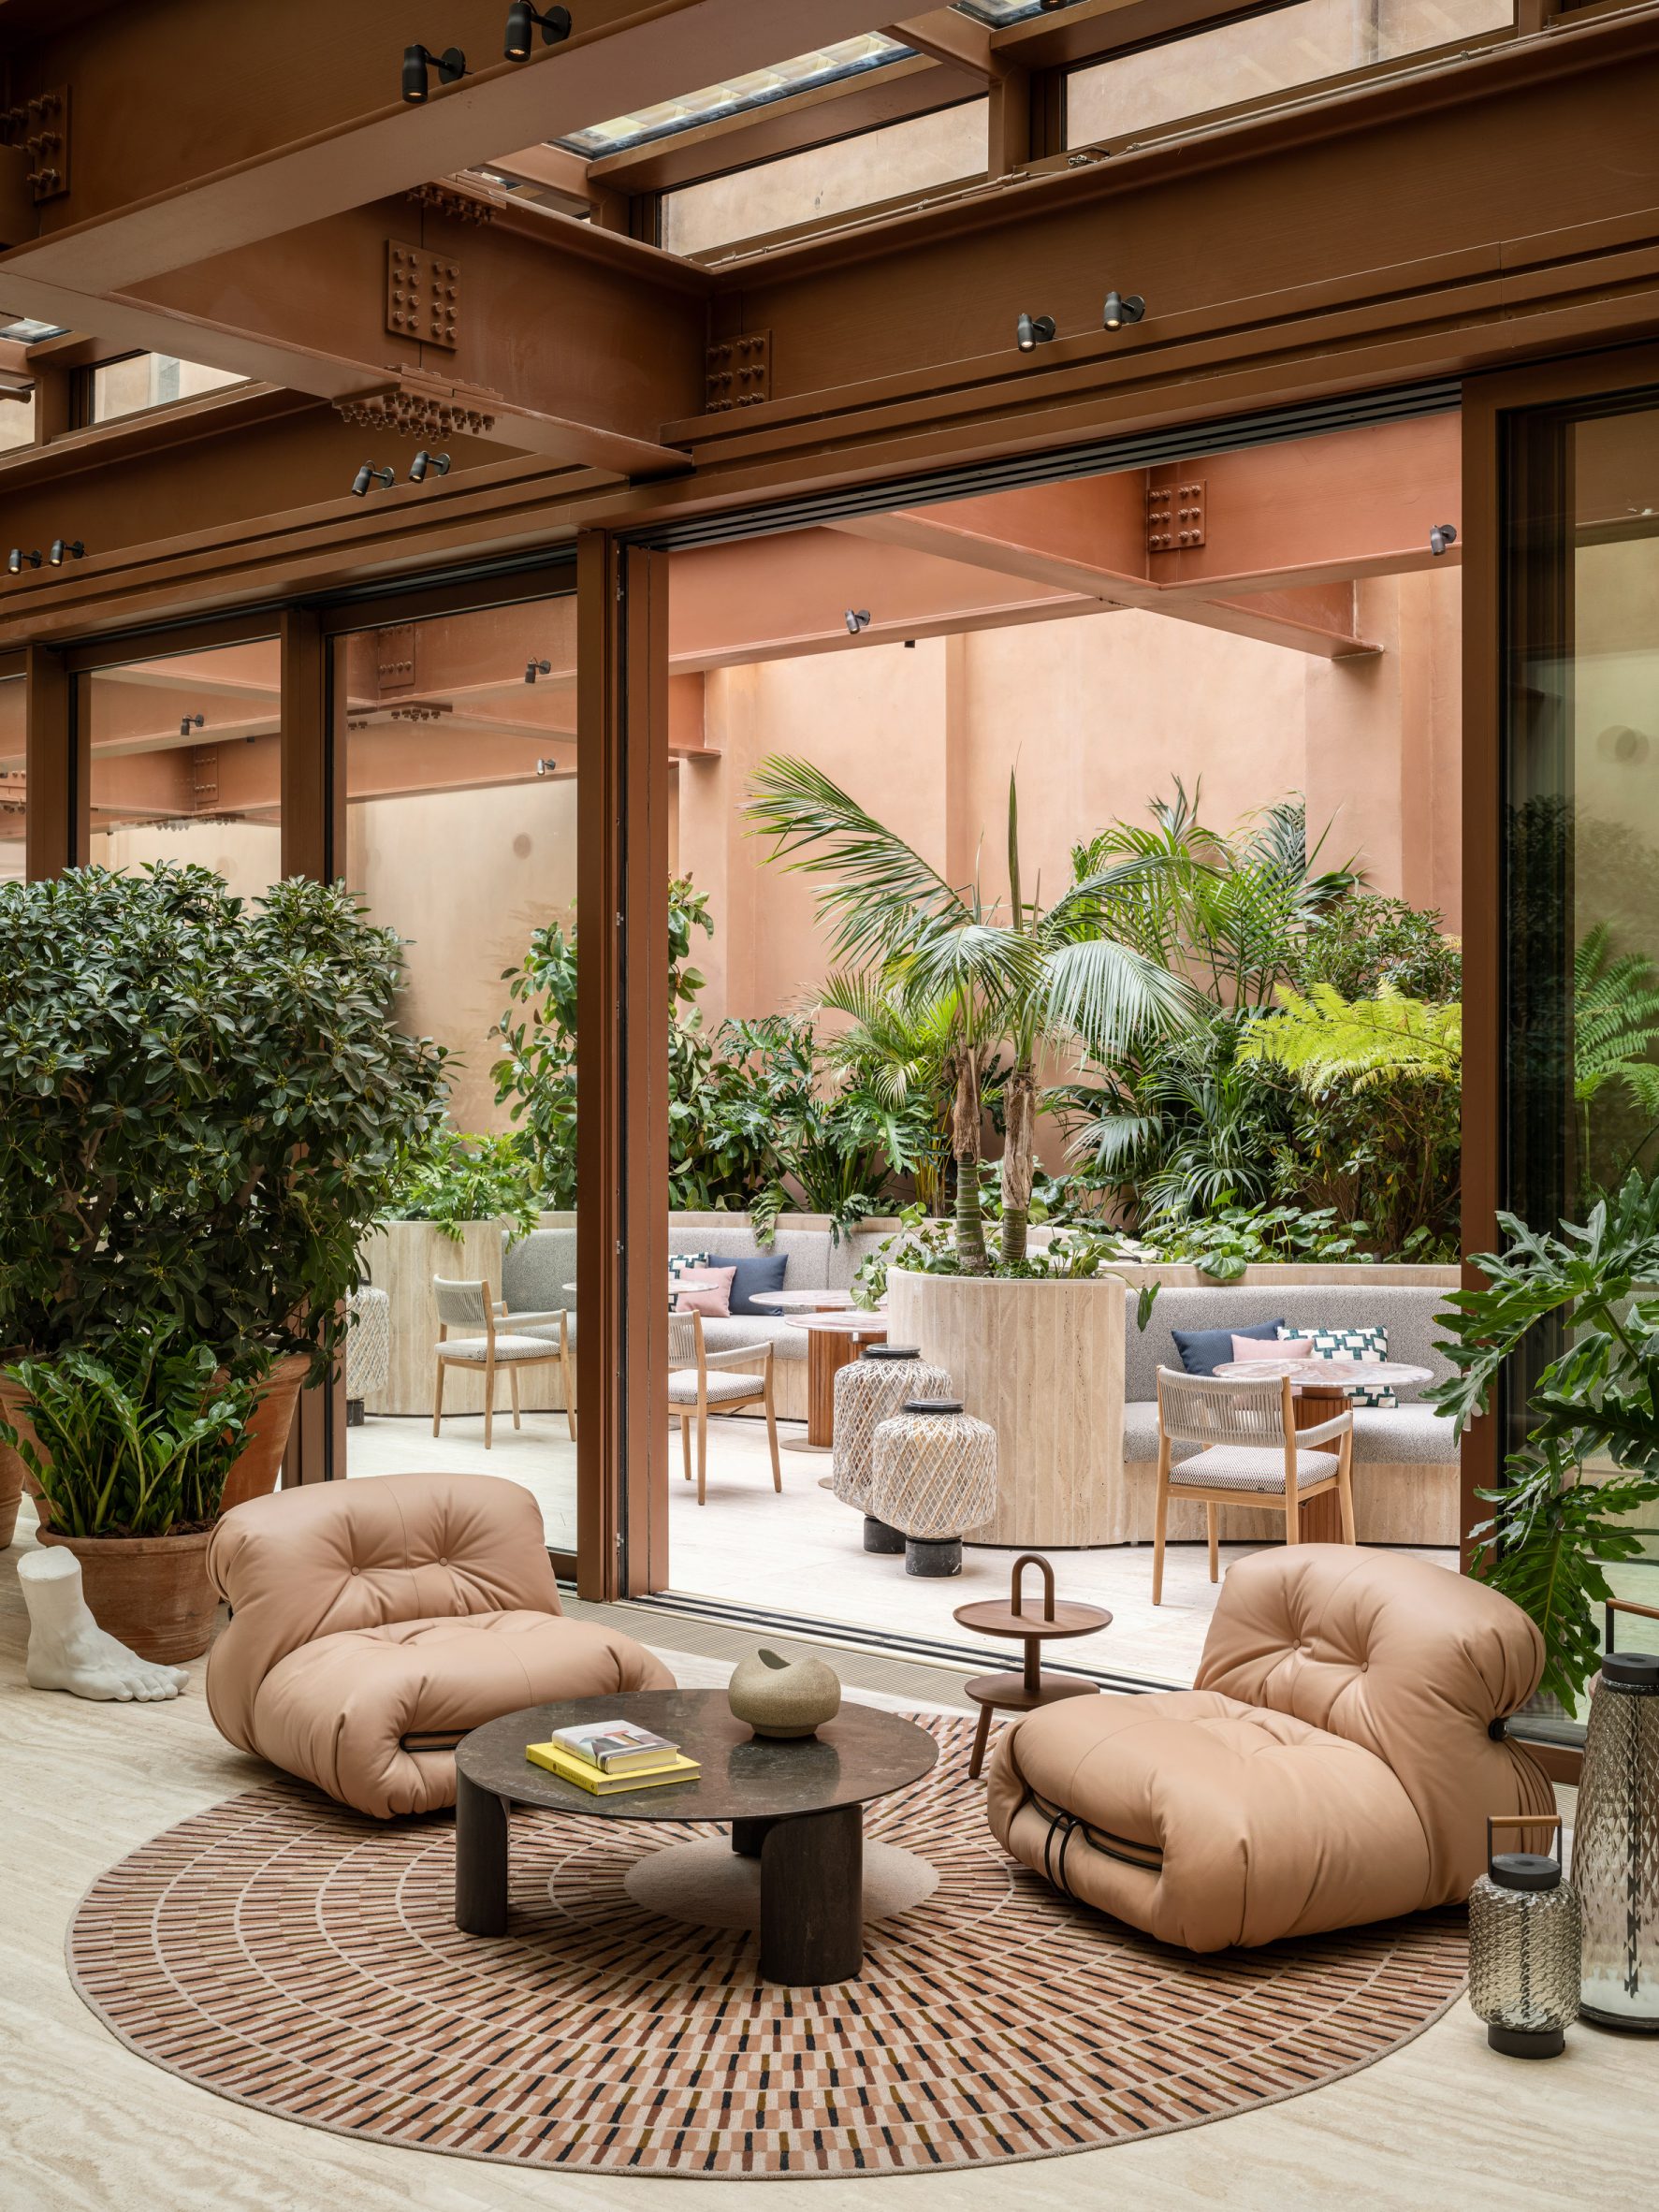 Lounge seats on a circular rug, in front of an opened glass partition in Six Senses Rome hotel by Patricia Urquiola